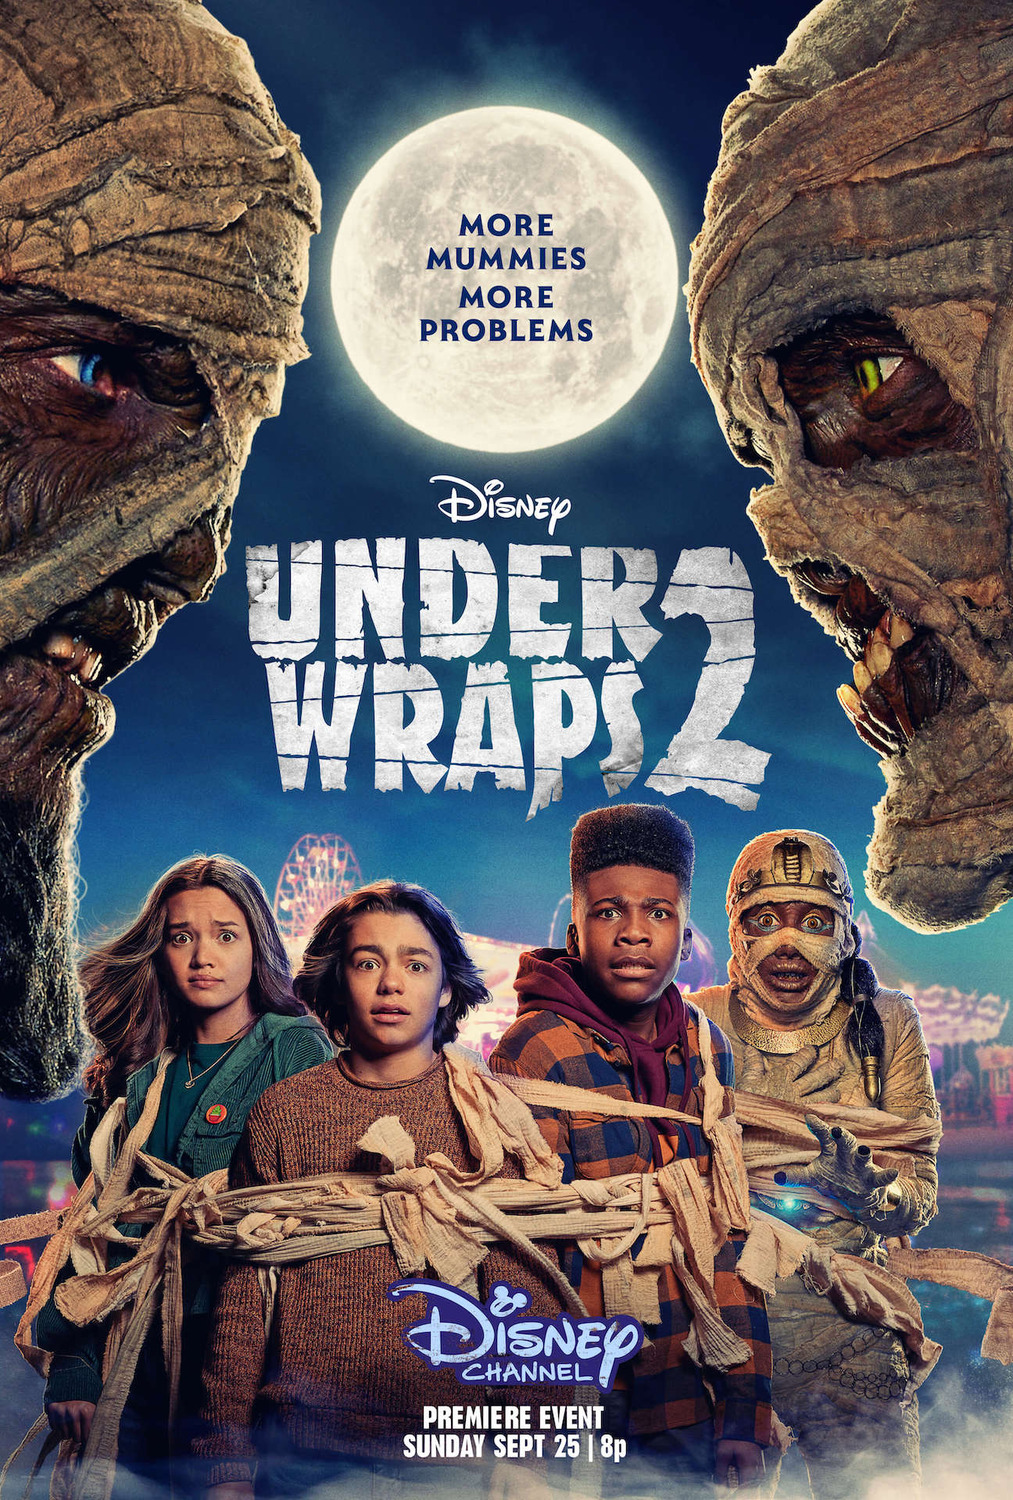 Extra Large TV Poster Image for Under Wraps 2 